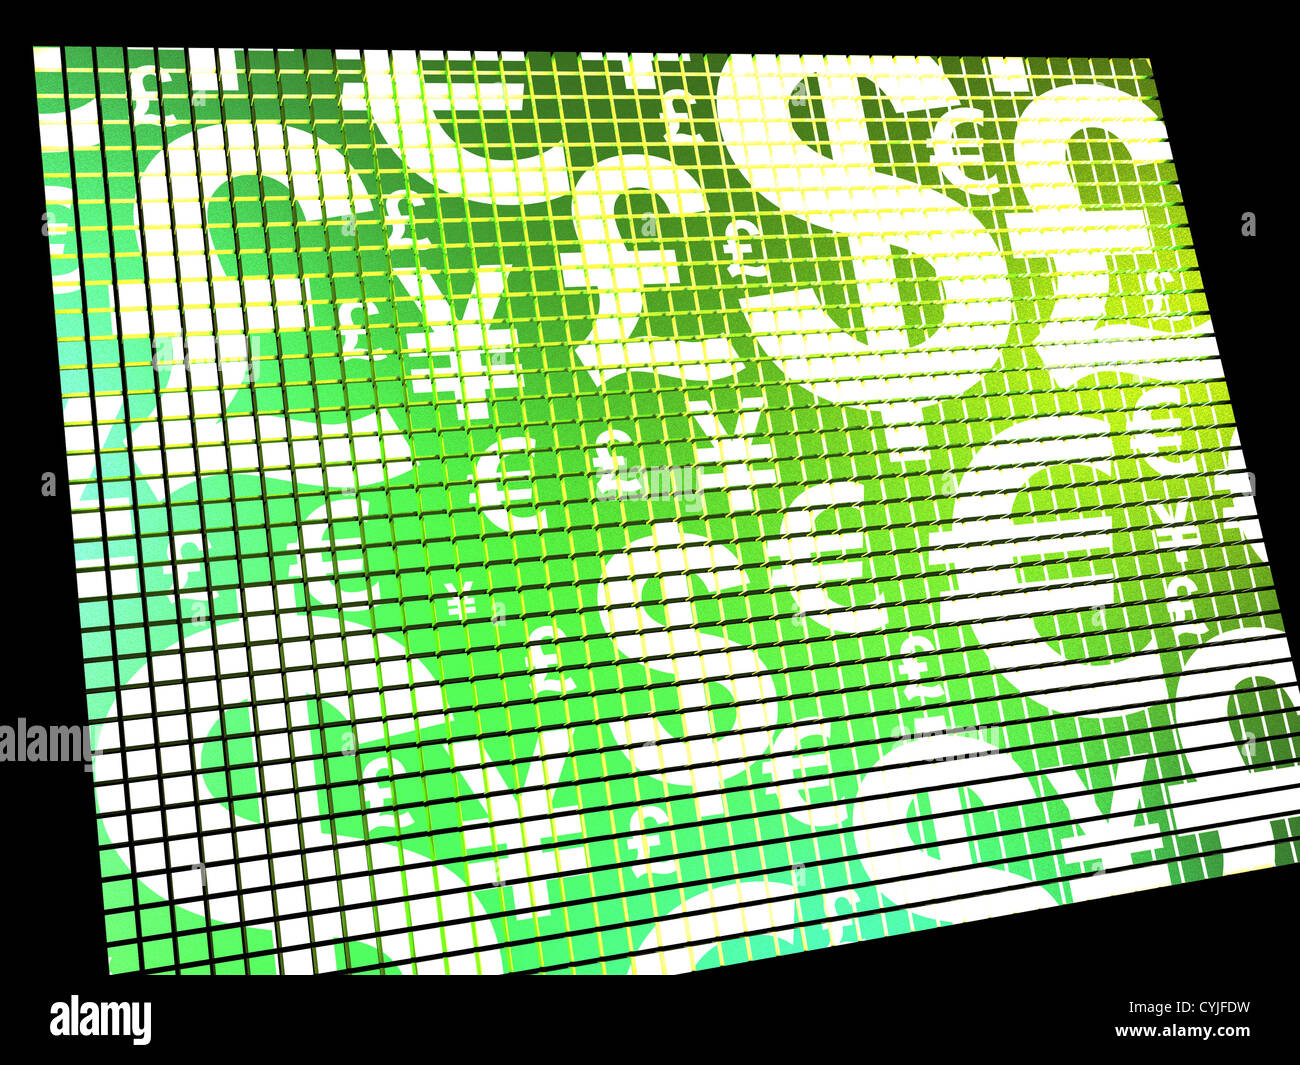 Currency Symbols On Compter Screen Showing Exchange Rate And Finances Stock Photo